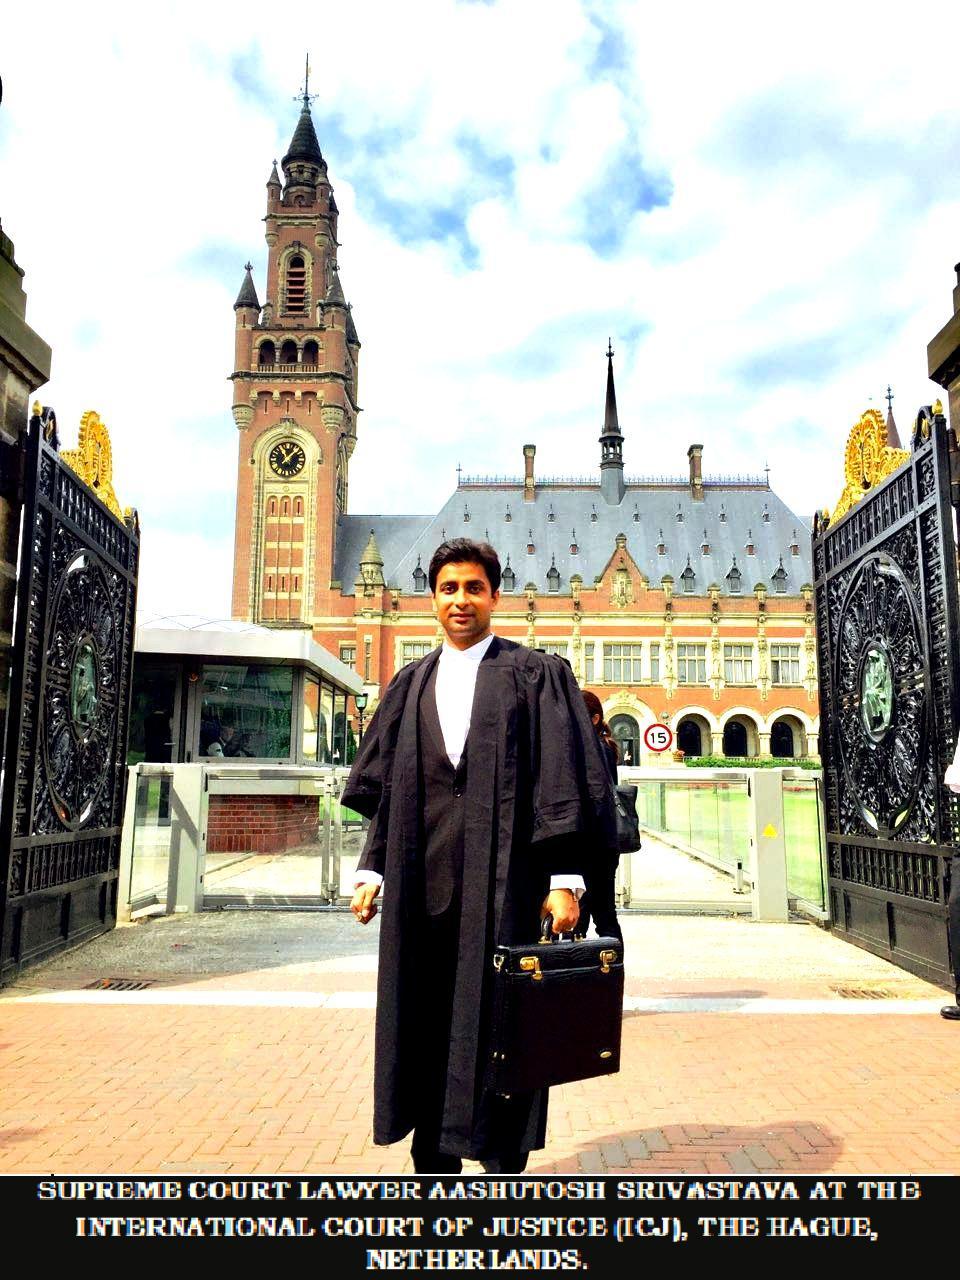 International Court of Justice – The Hague (Netherlands)